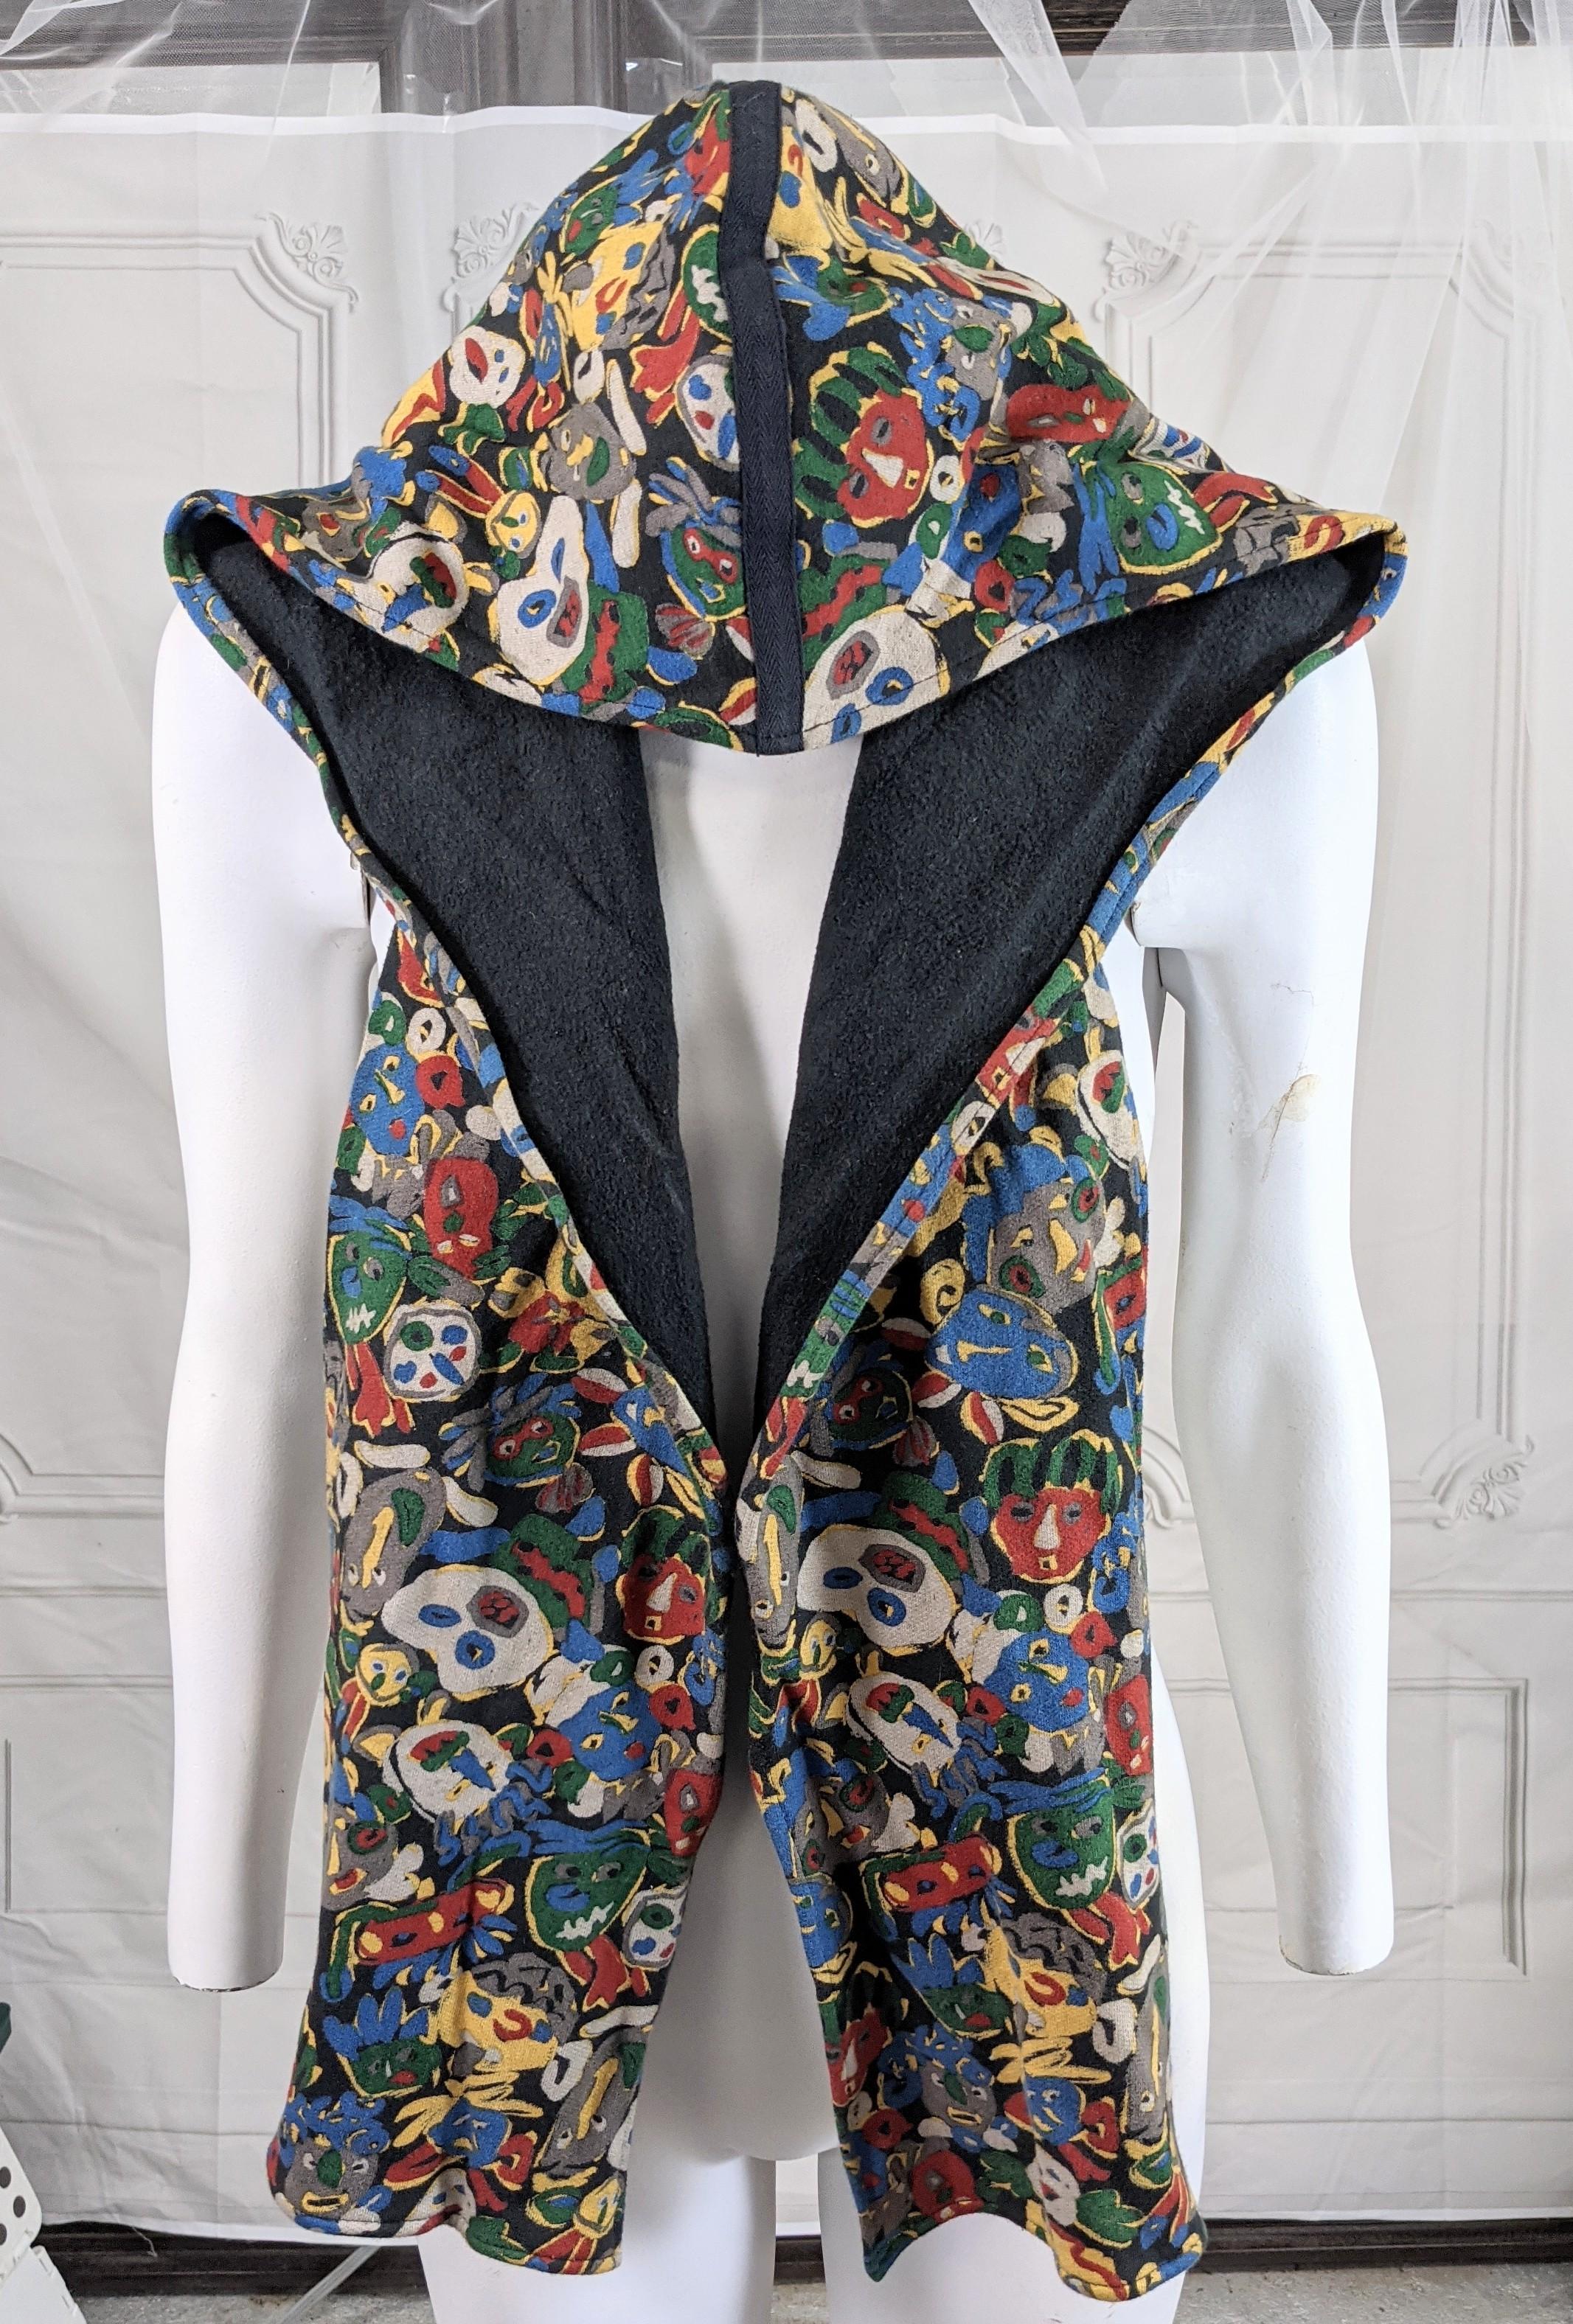 Jean Paul Gaultier Egon Schellie Carnivalle printed head scarf on a cotton jersey fleece fabrication from F/Winter 1984.  The cut is a large hood with attached scarves.

Excellent condition , unworn